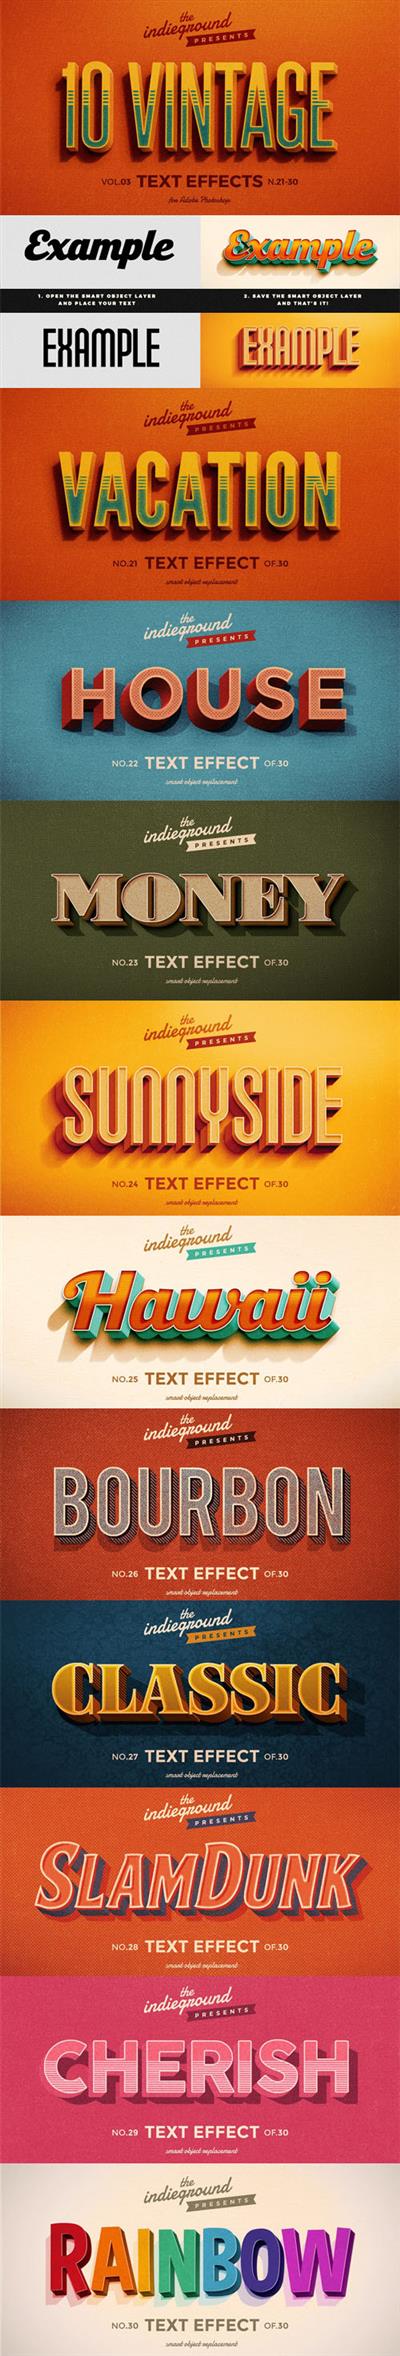 CM - 10 Vintage Text Effects Vol.3 for Adobe Photoshop